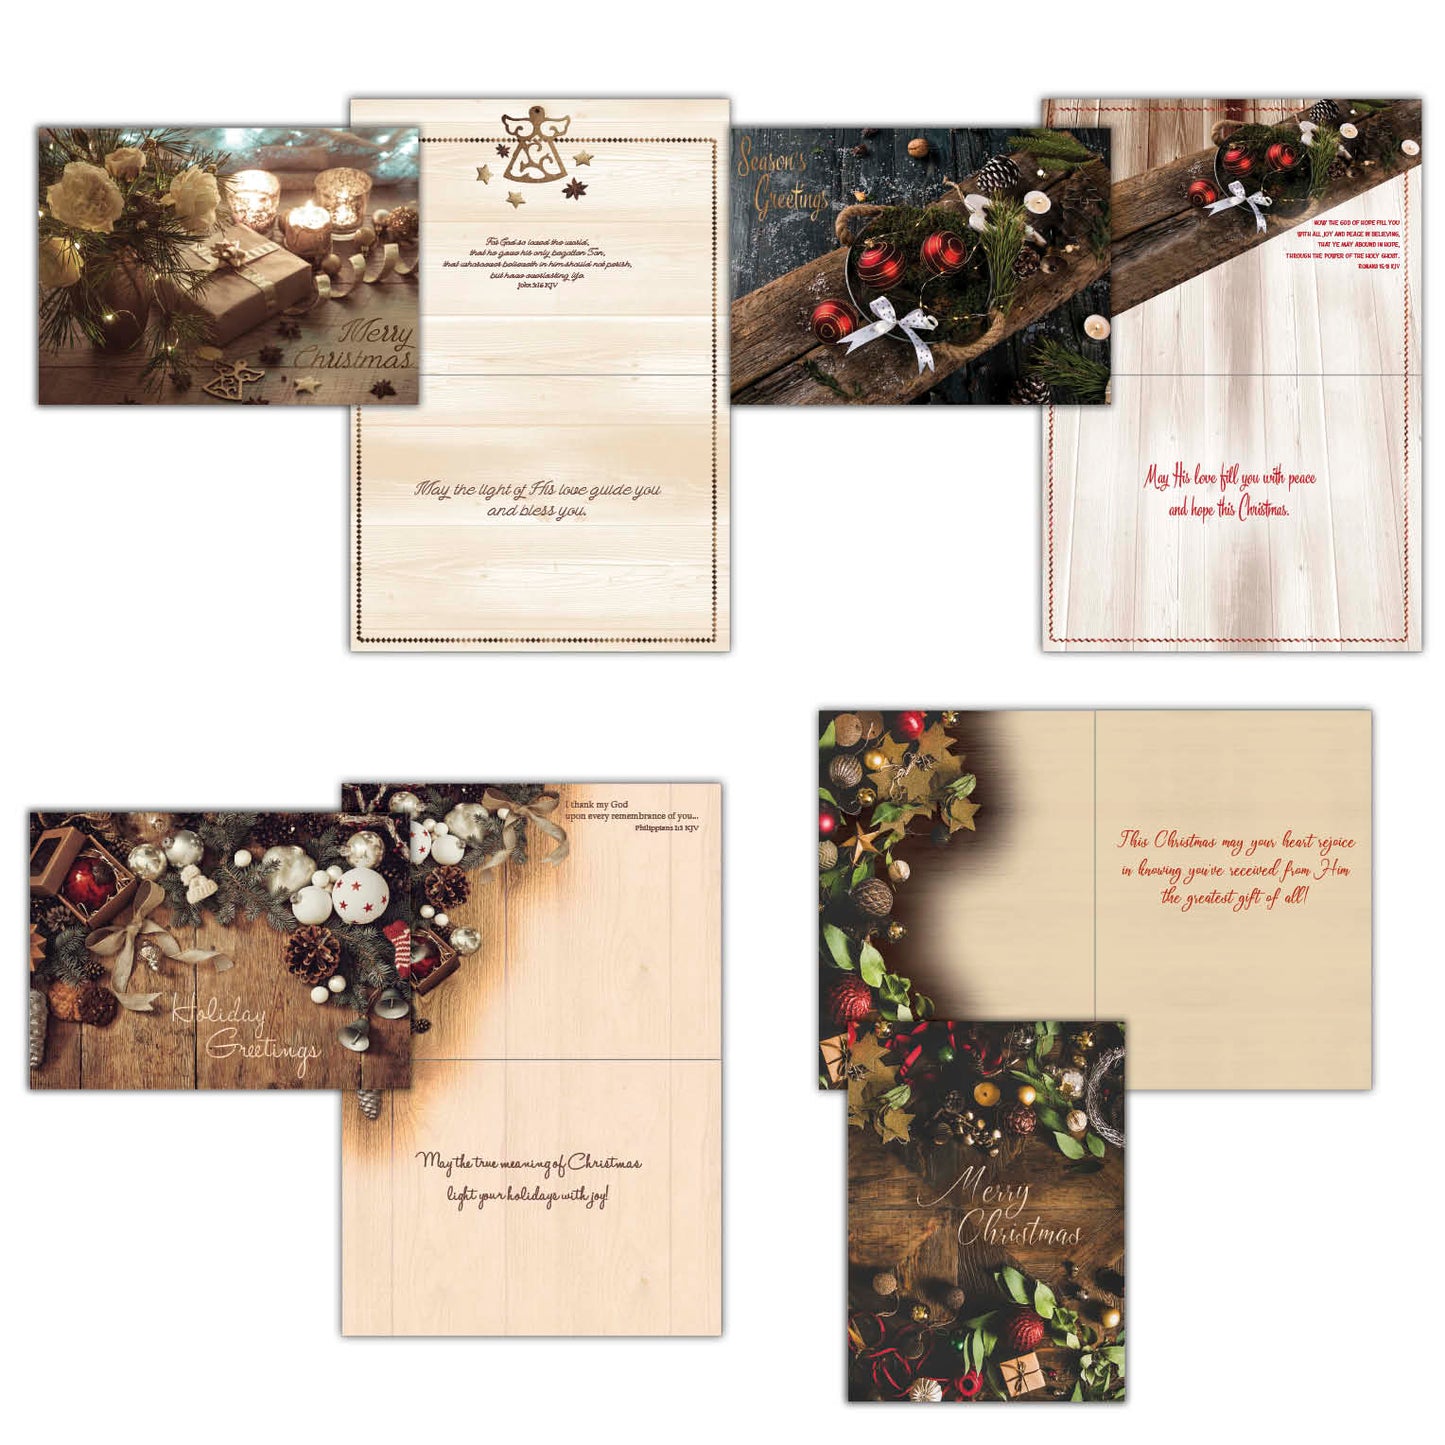 christmas cards with candles, gifts, ornaments, pine cones and other decorations